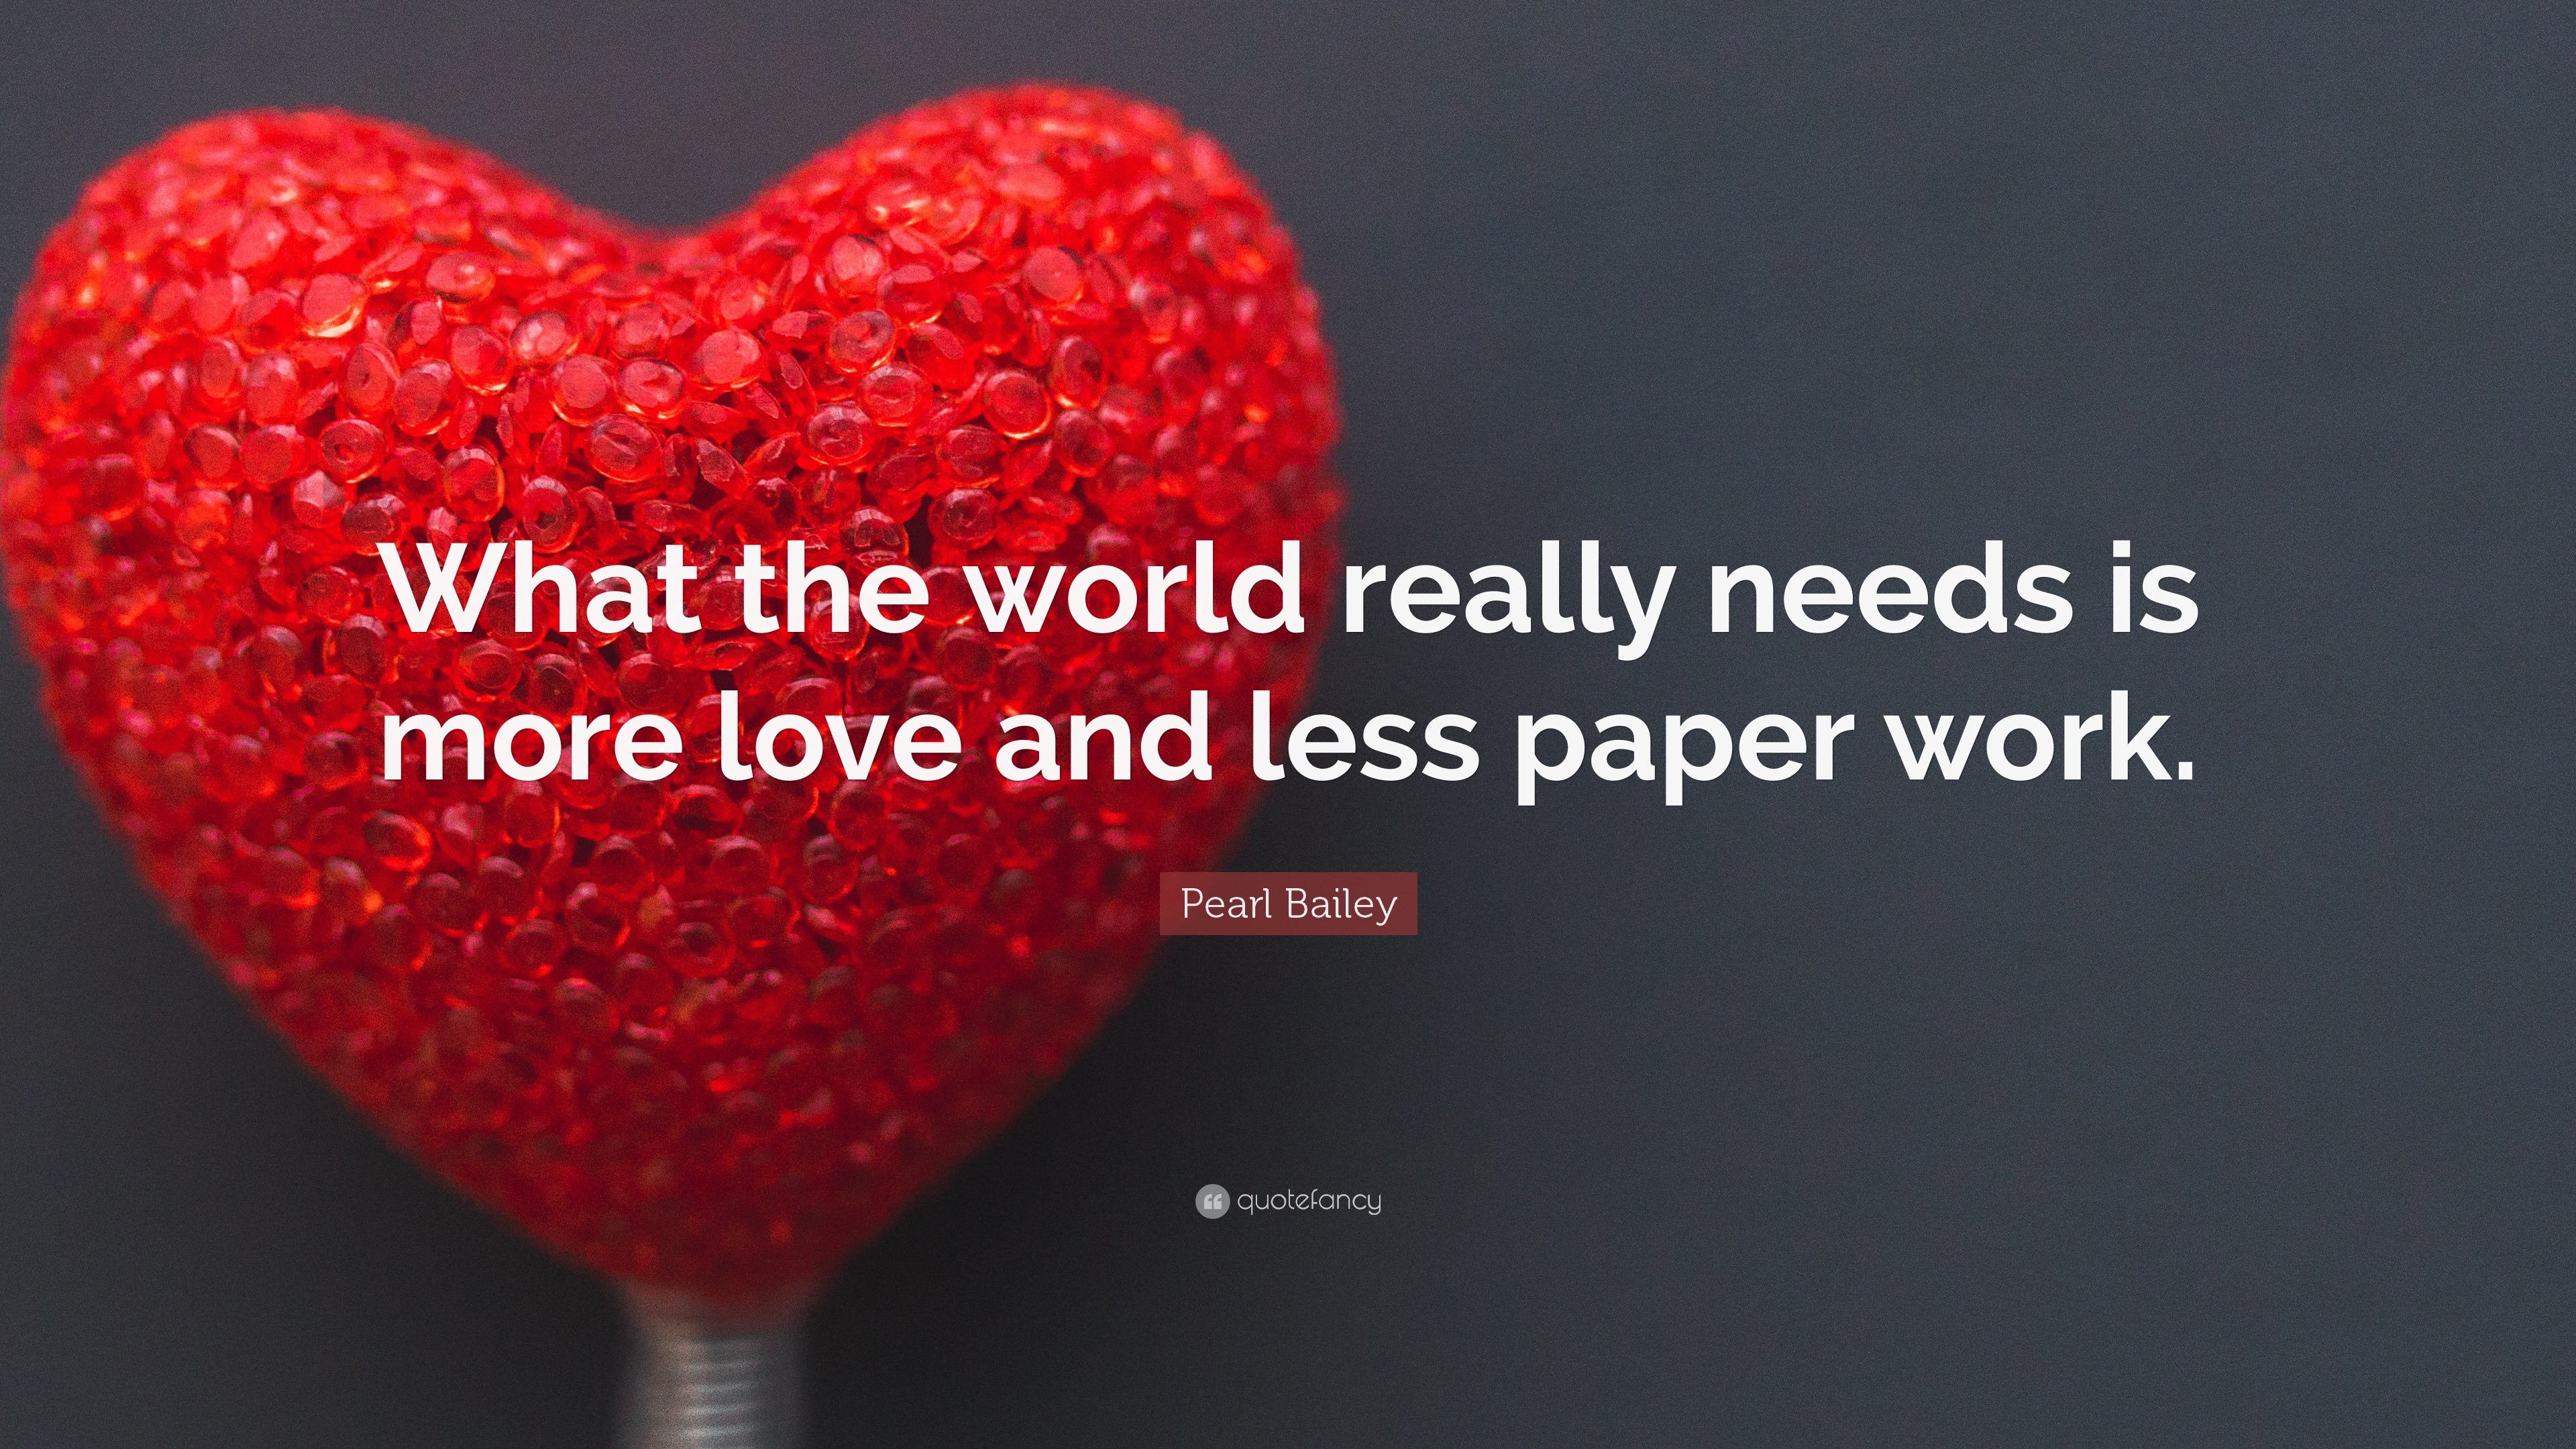 Valentine s Day Quotes “What the world really needs is more love and less paper